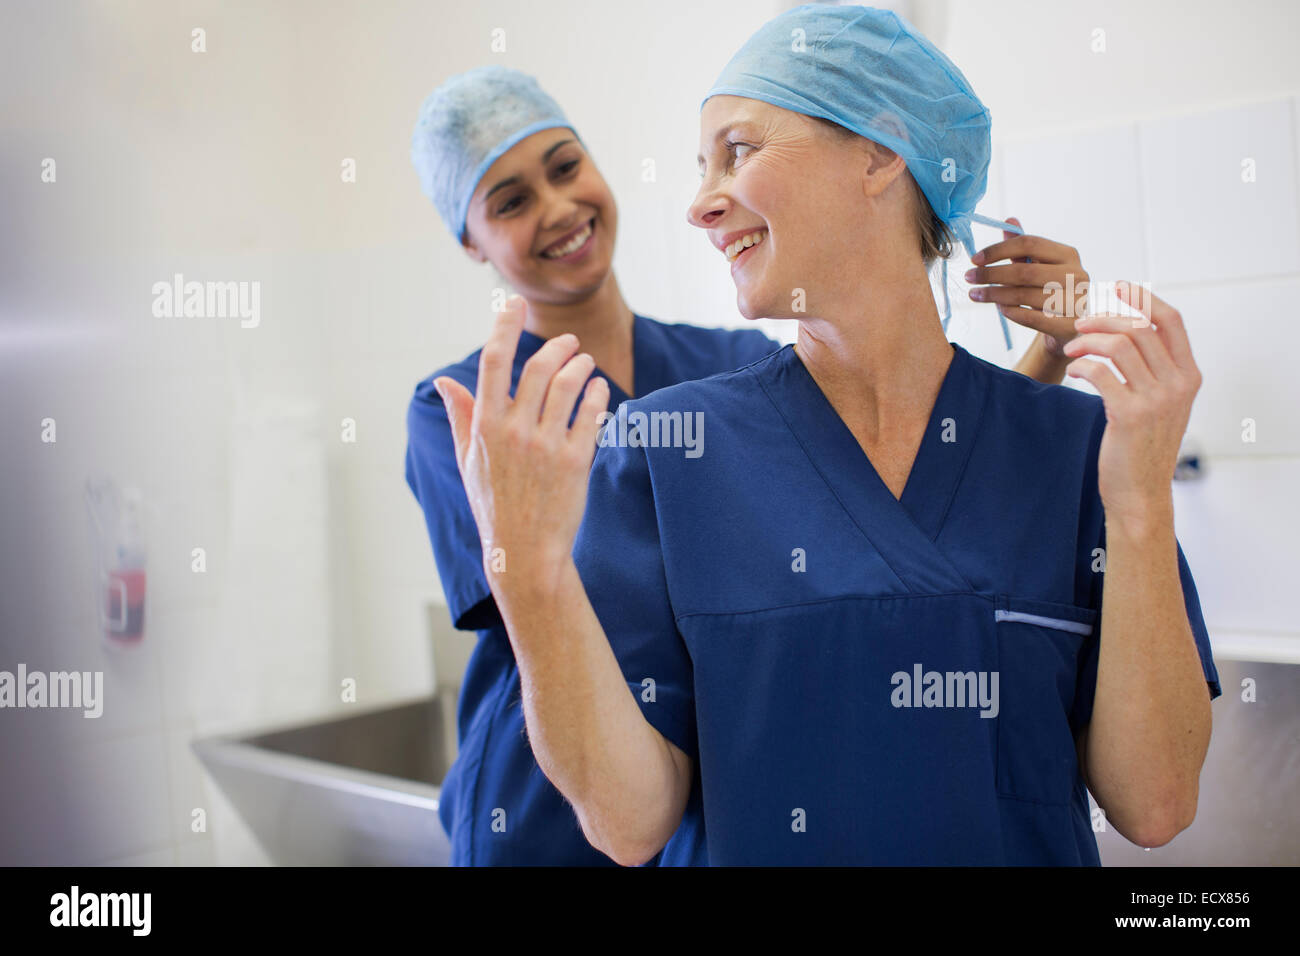 Two smiling surgeons getting ready for surgery Stock Photo